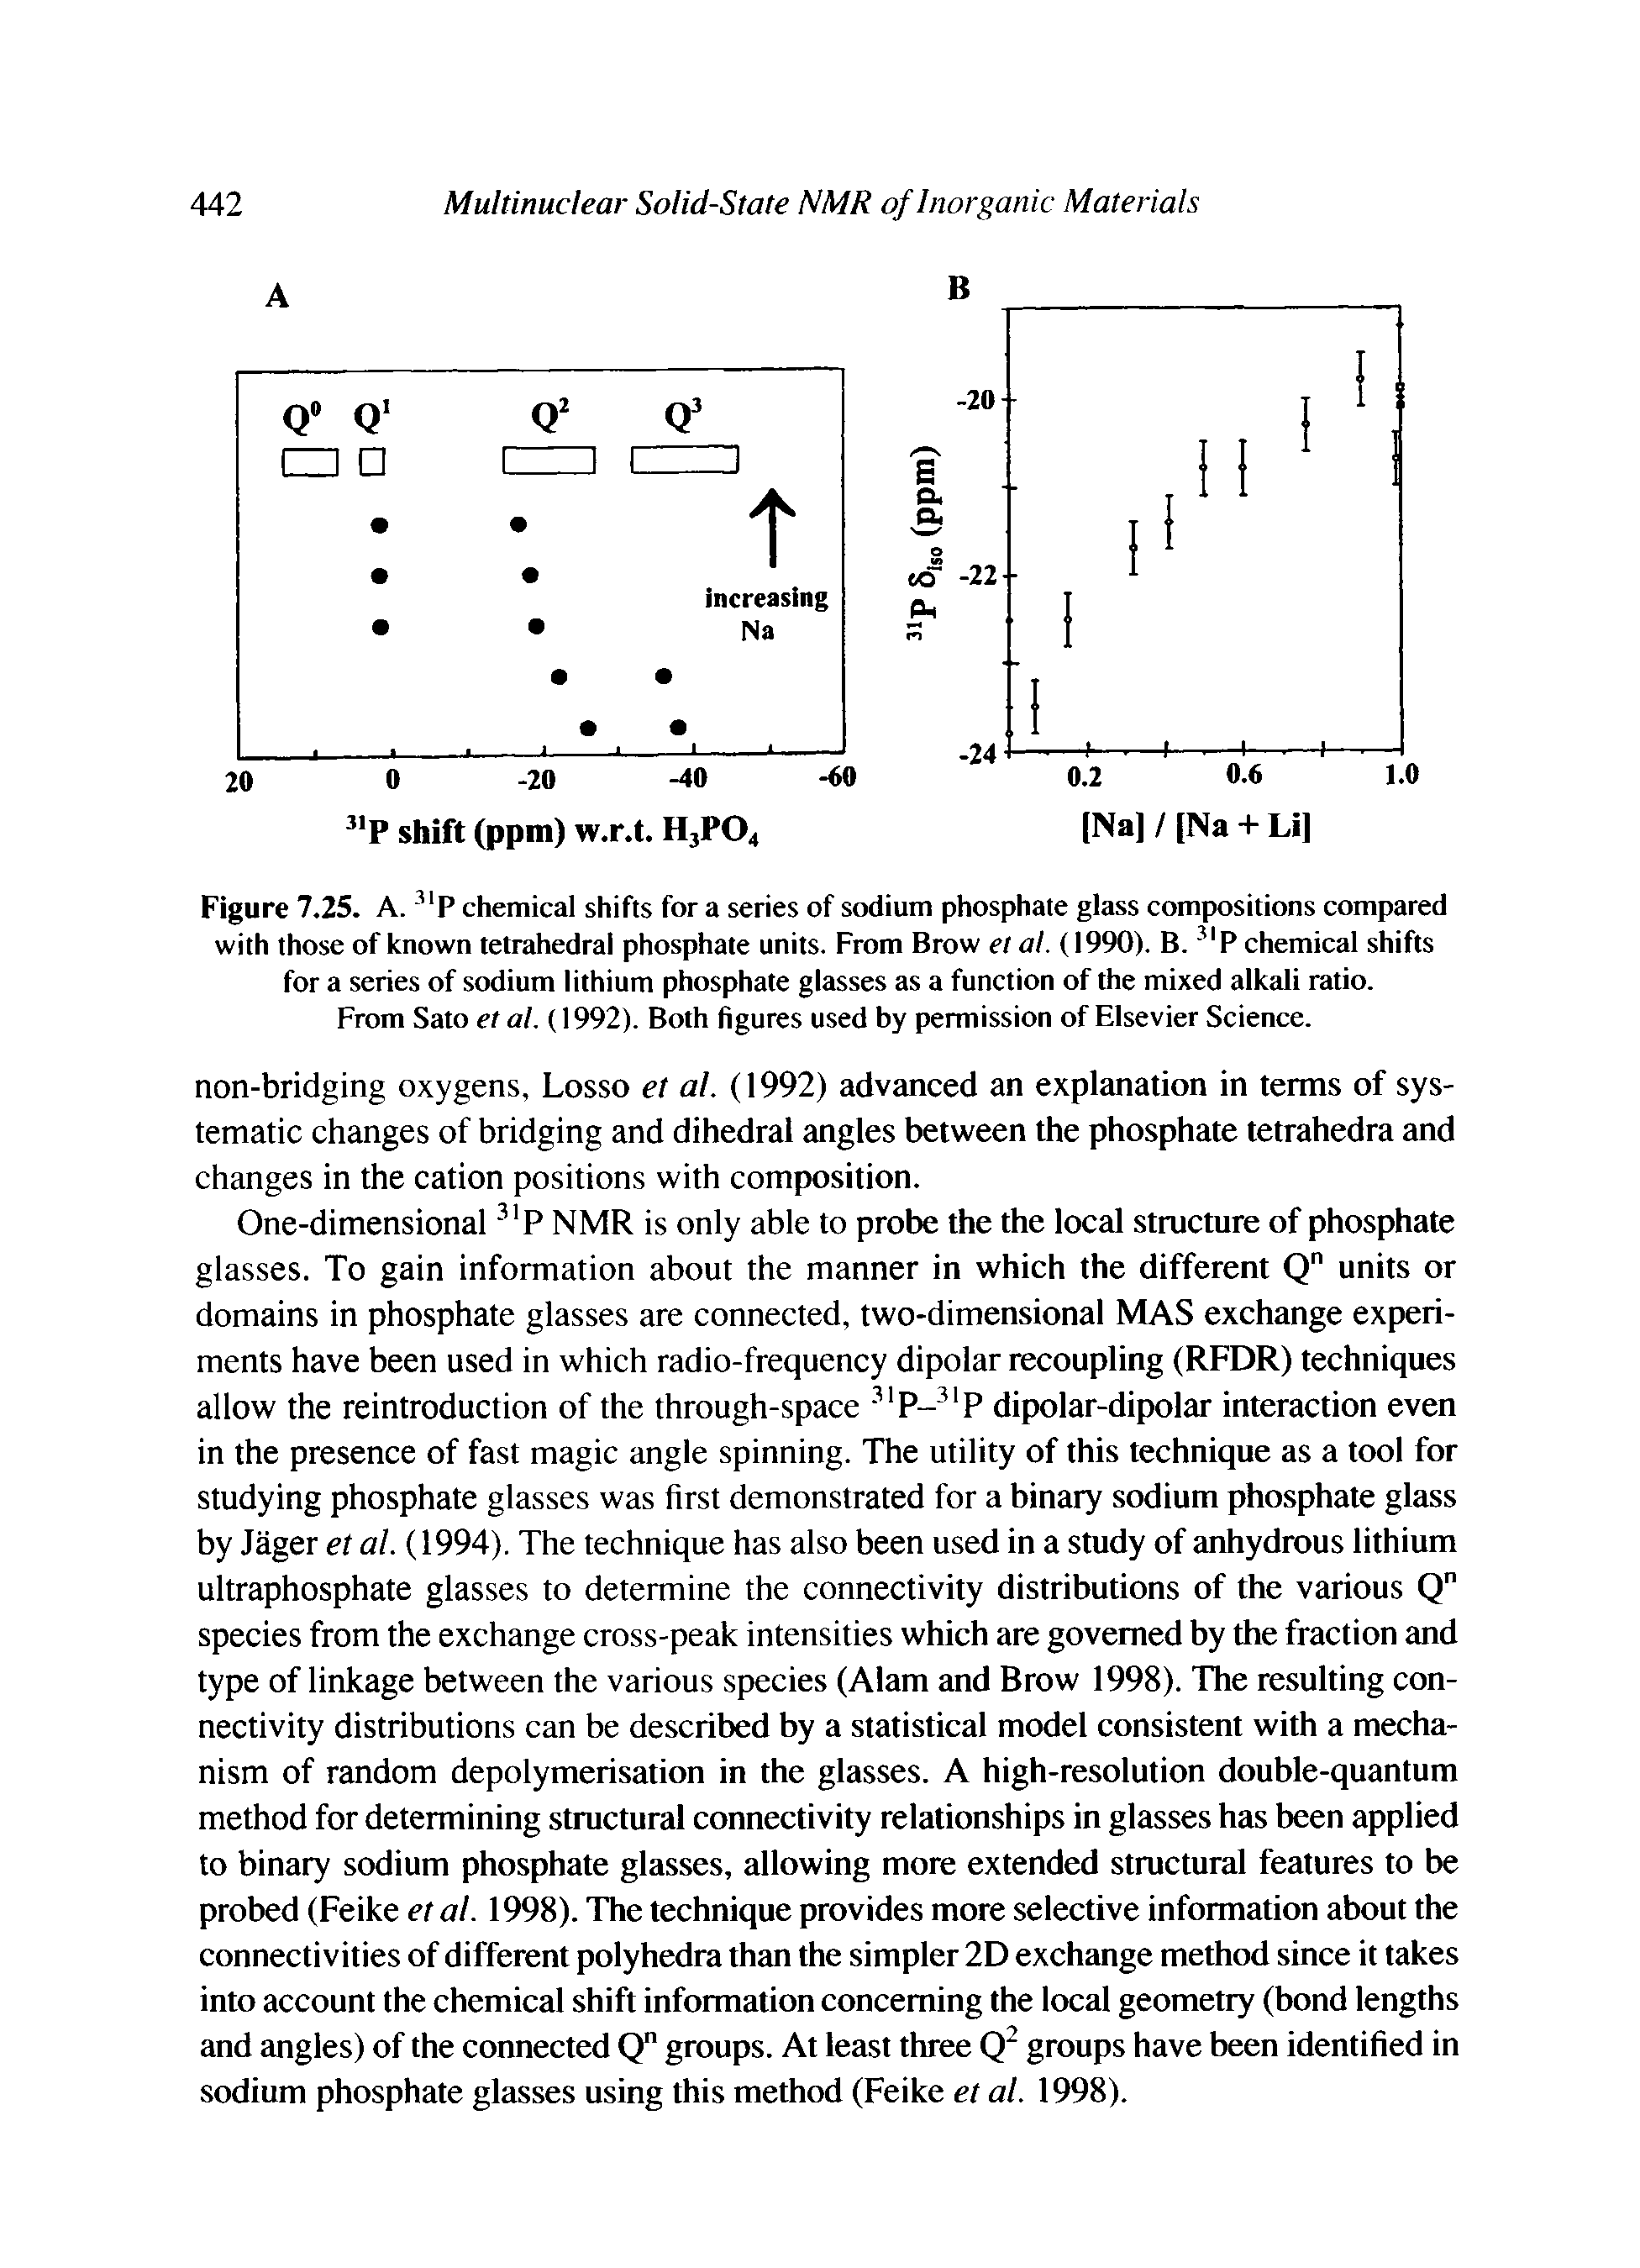 Figure 7.25. A. chemical shifts for a series of sodium phosphate glass compositions compared with those of known tetrahedral phosphate units. From Brow et al. (1990). B. P chemical shifts for a series of sodium lithium phosphate glasses as a function of the mixed alkali ratio.